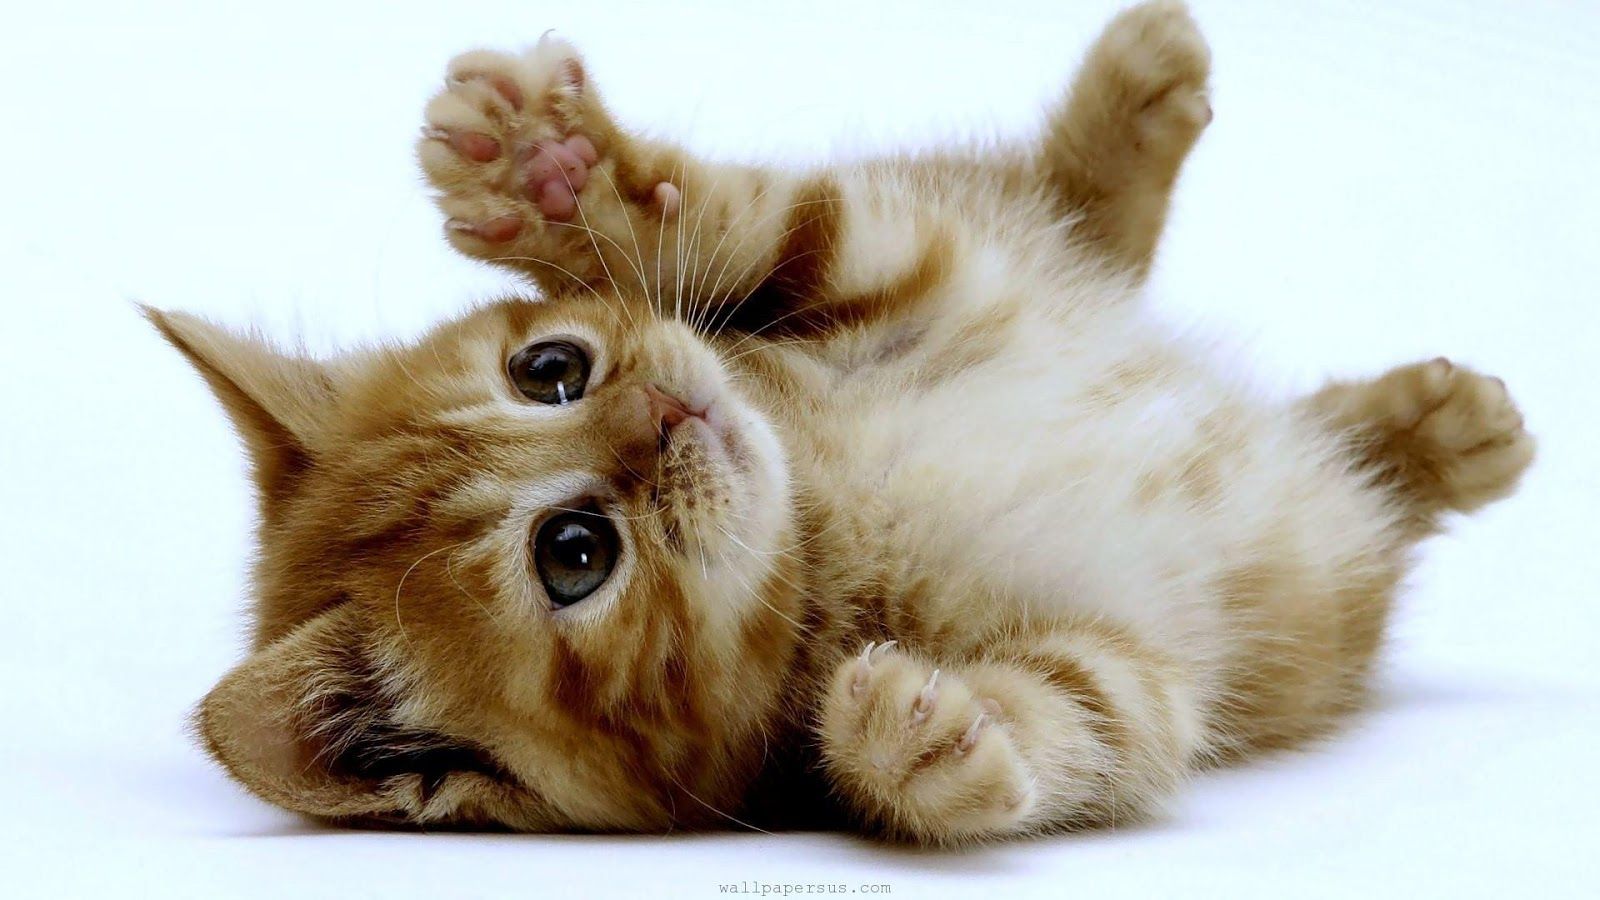 Cute Kitten Wallpaper HD Android Apps On Google Play Adorable